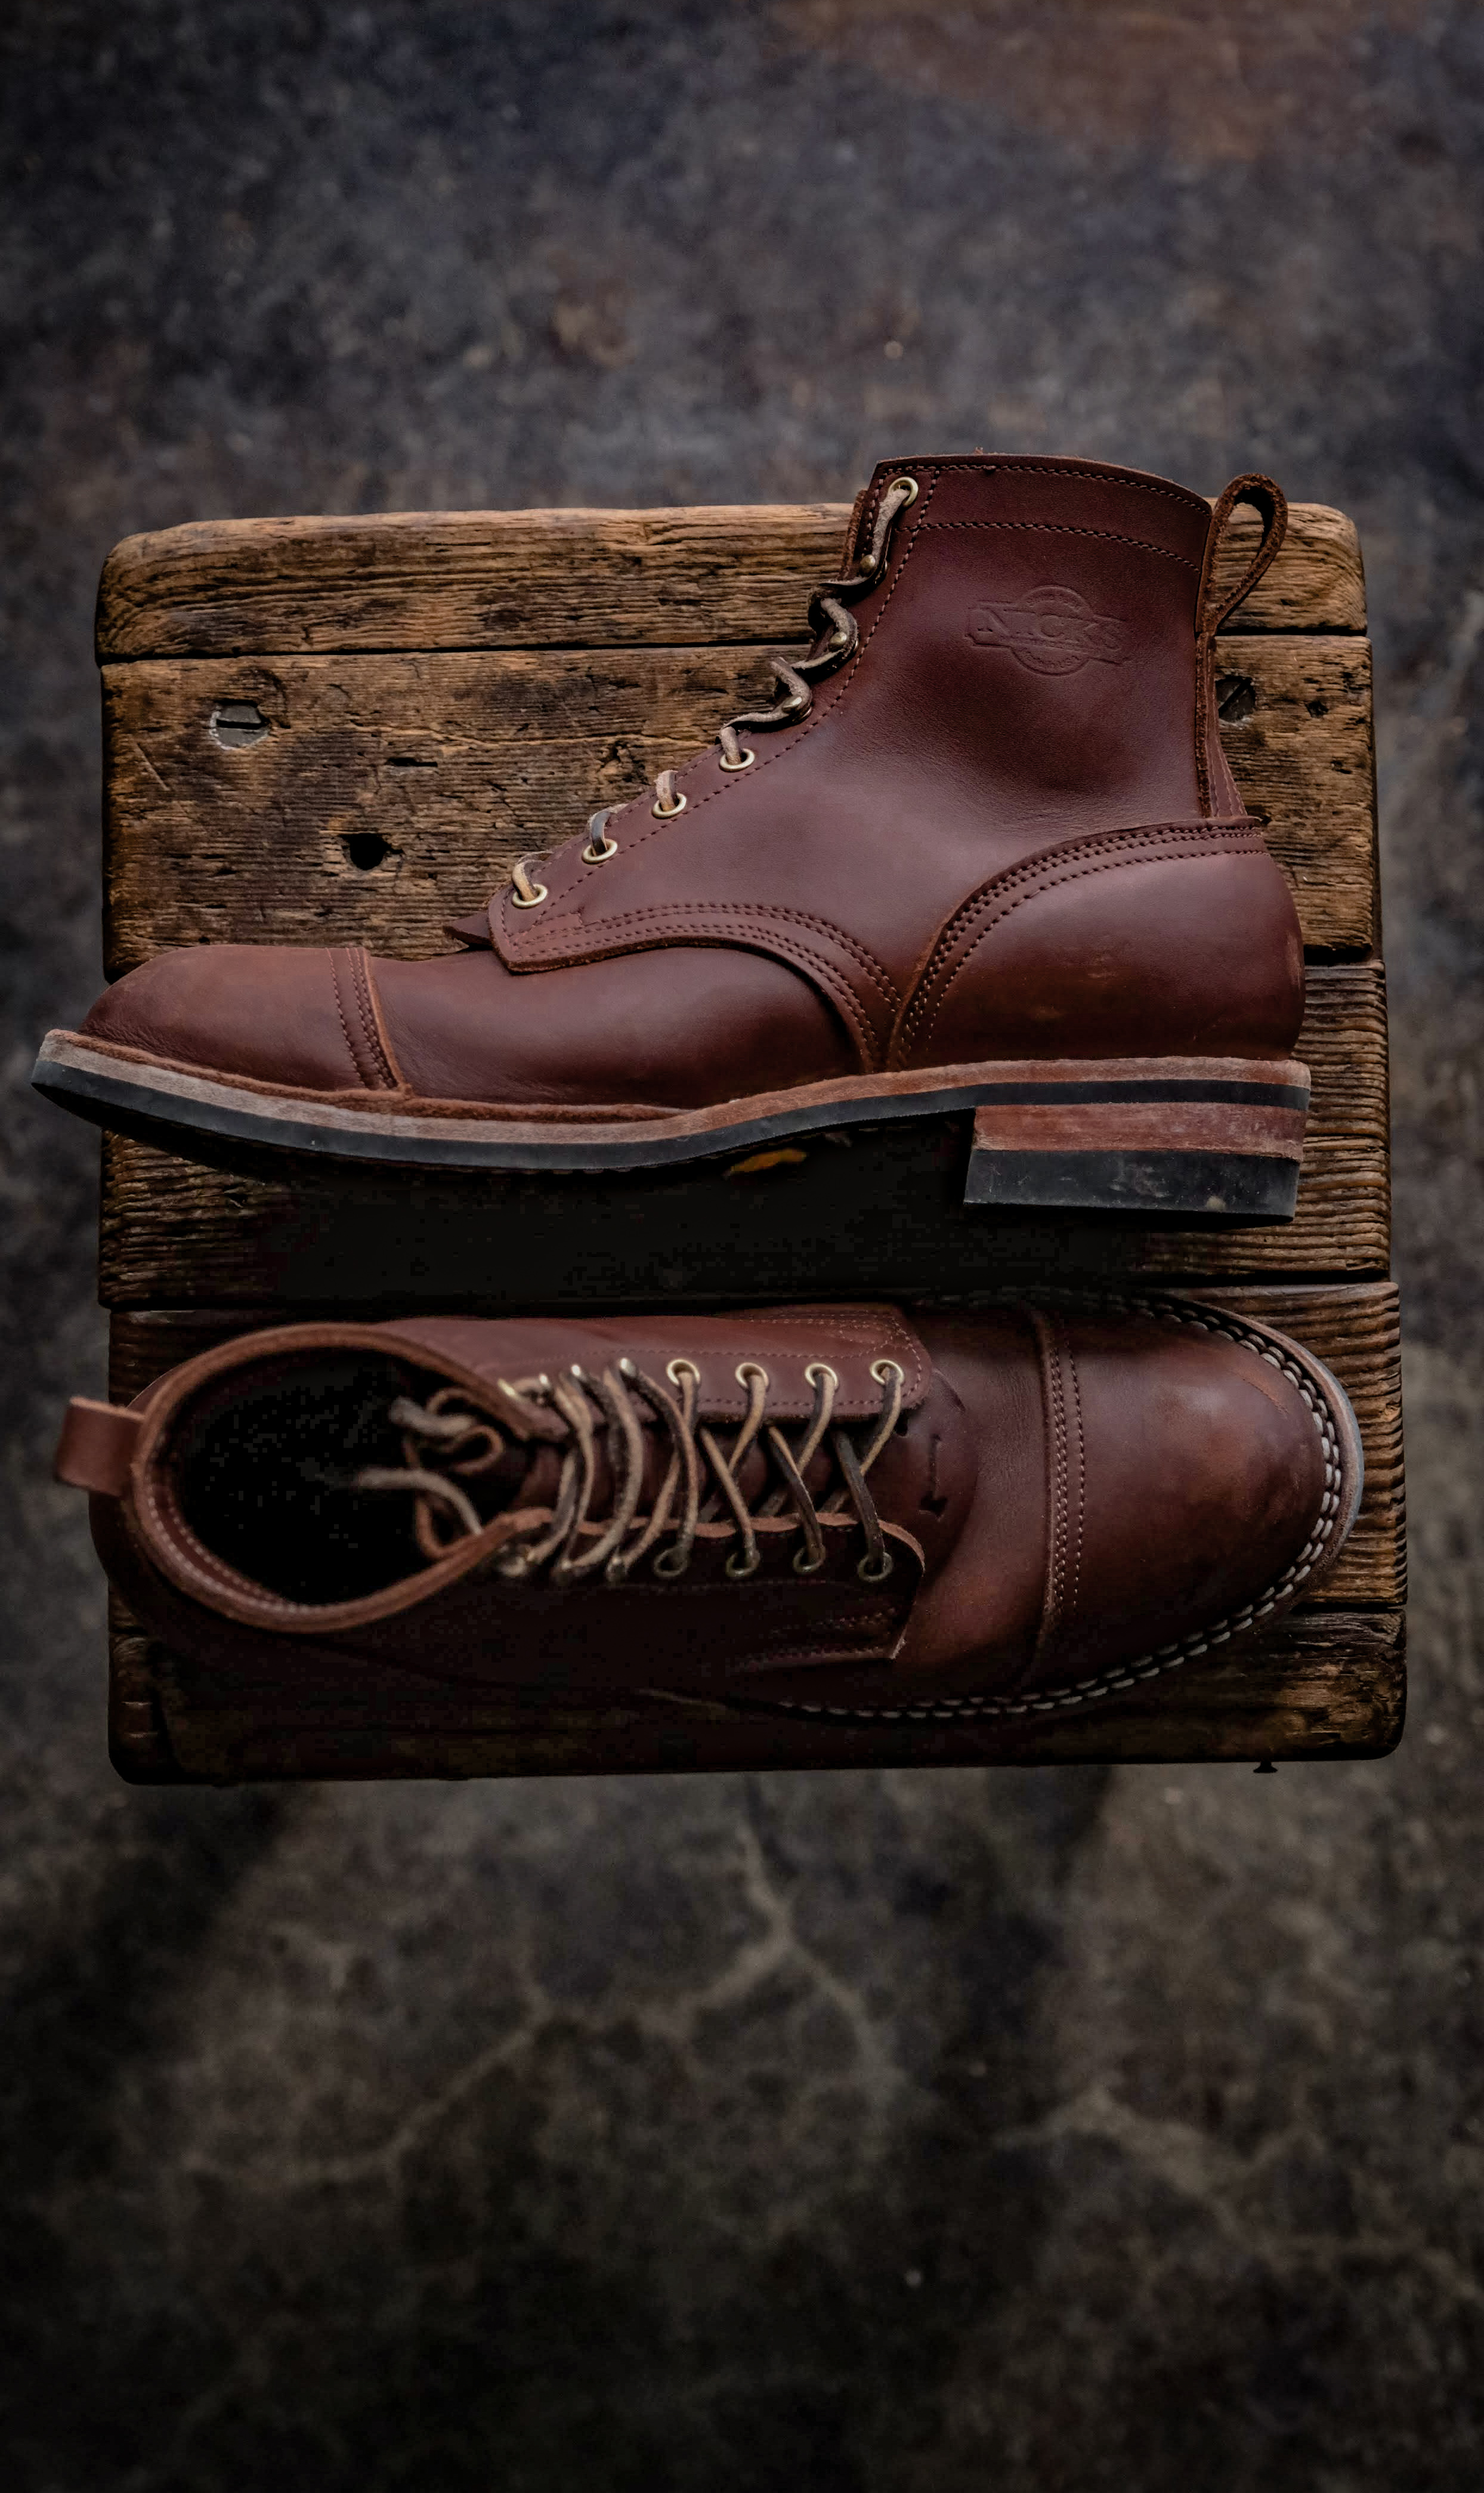 Nicks x Craft & Lore Task Boot in chocolate smooth